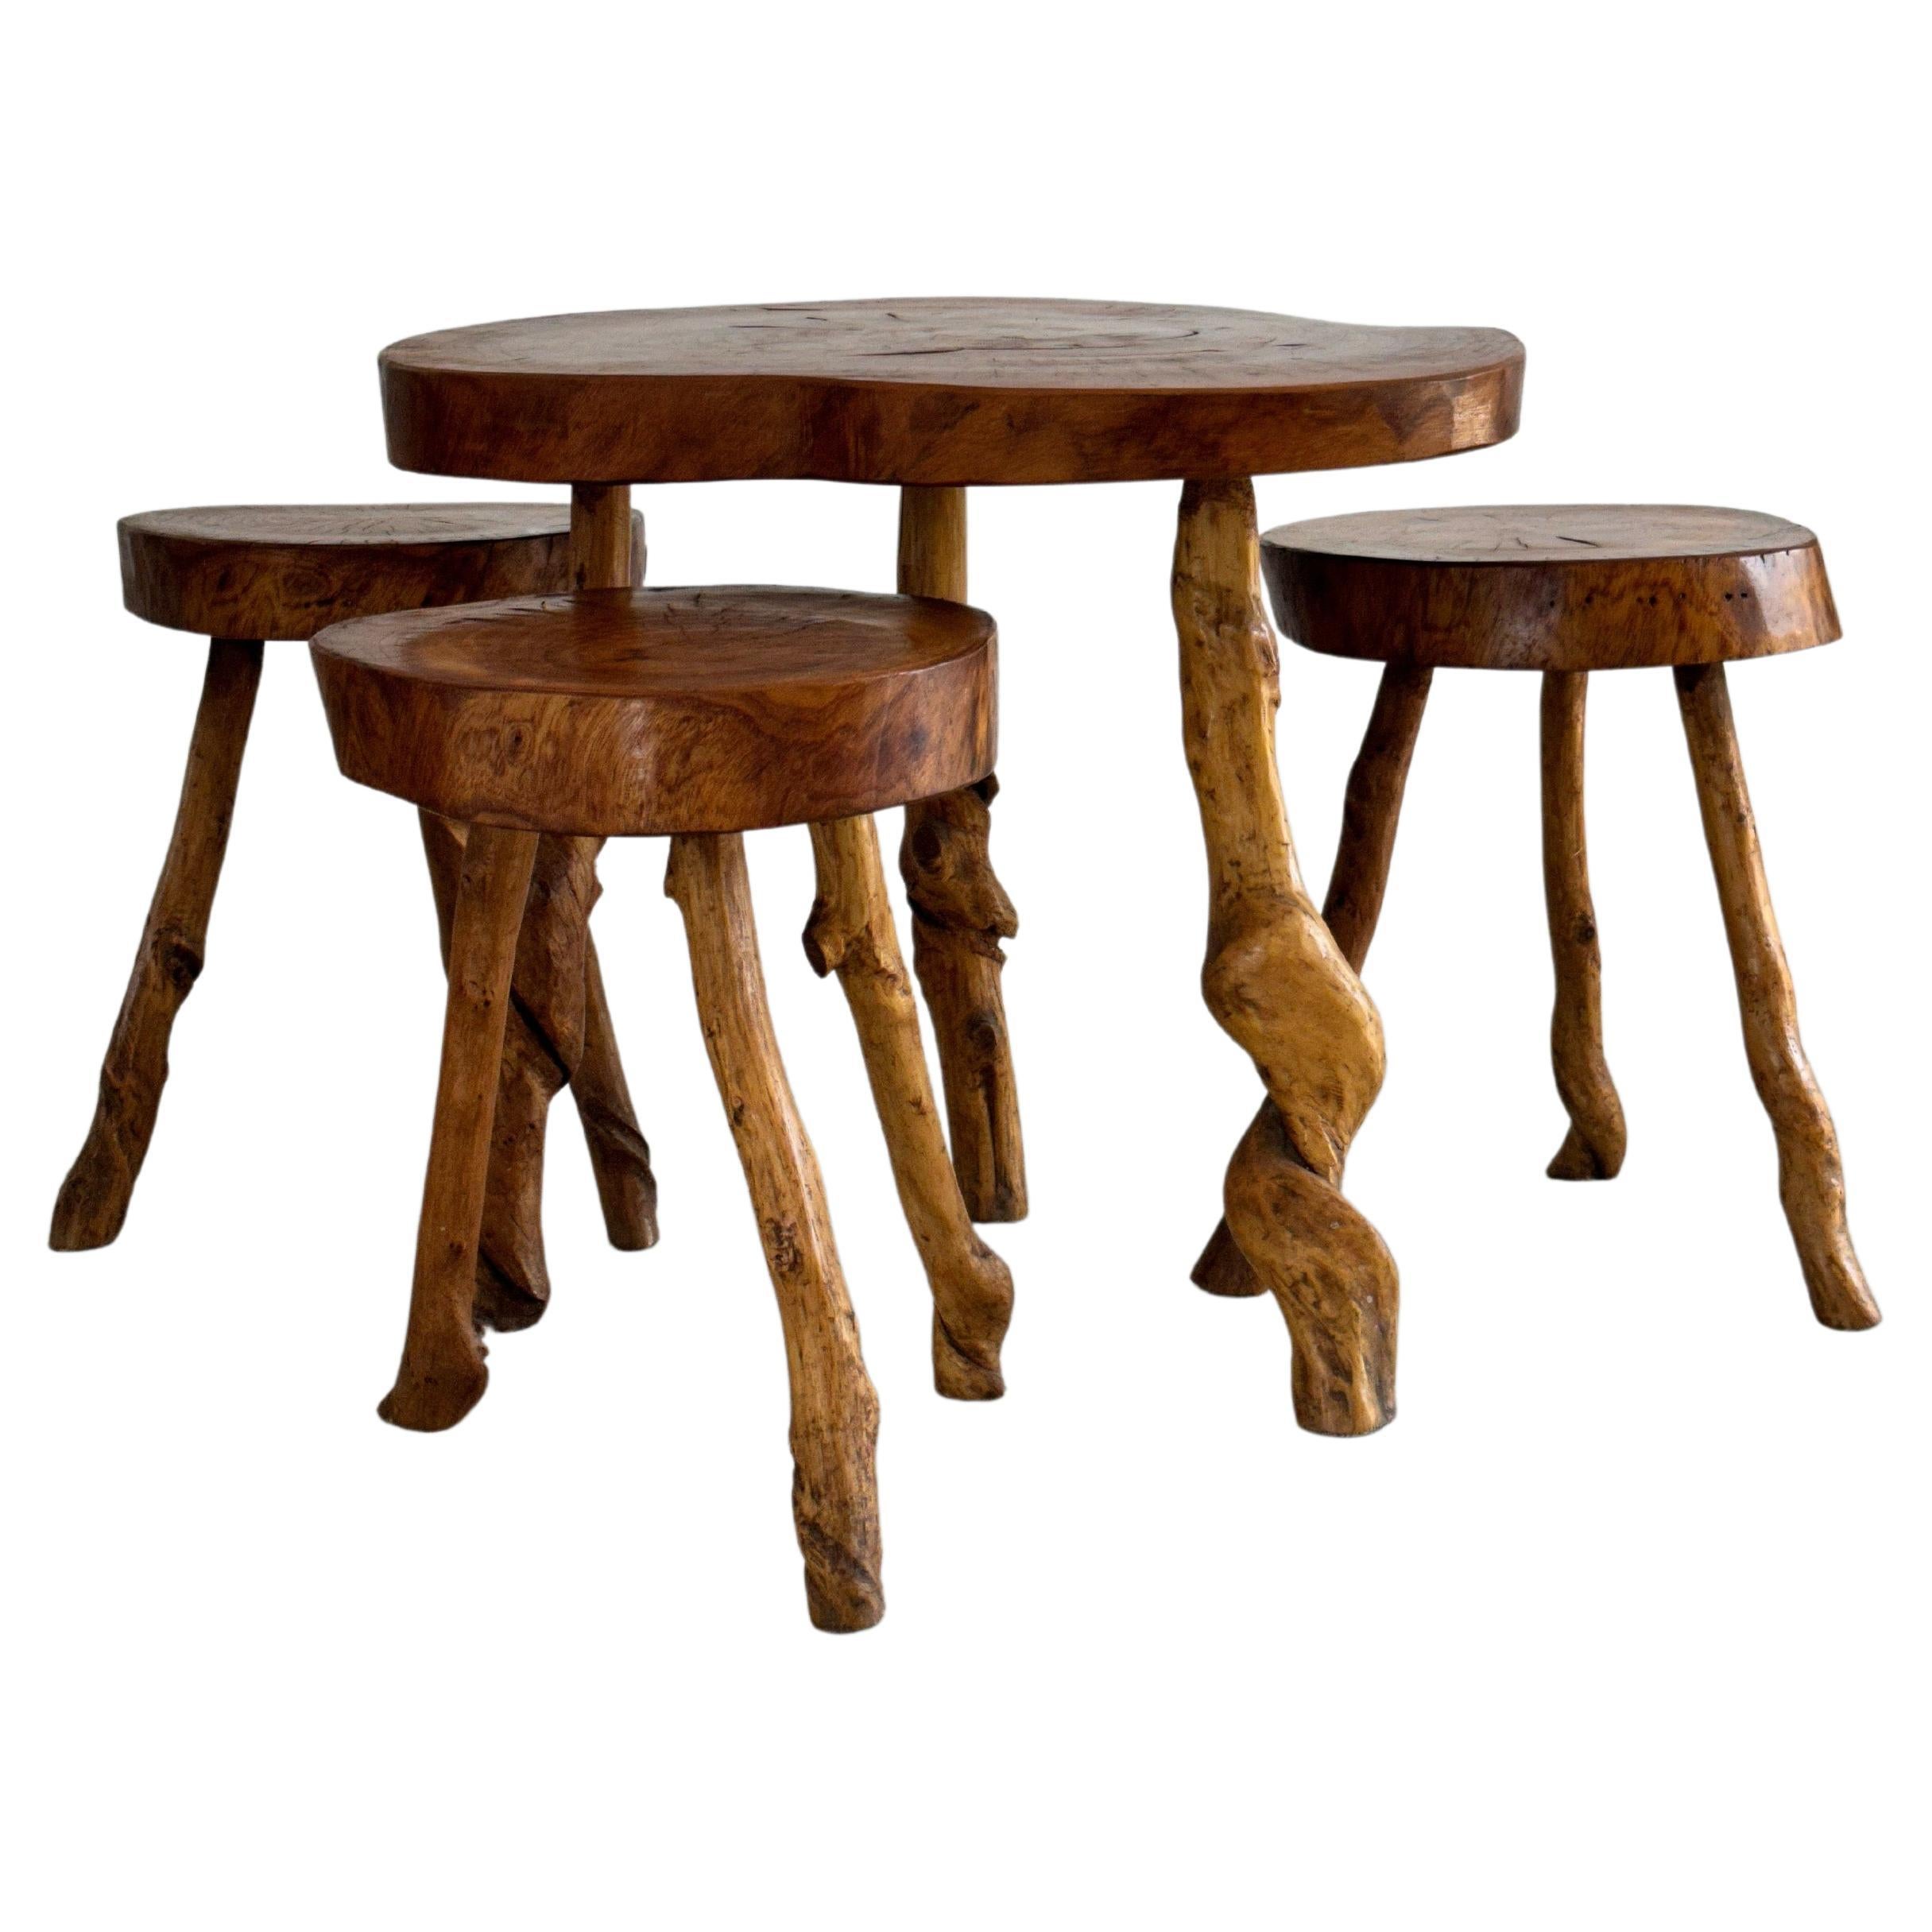 Brutalist Set of 3 Stools and 1 Coffee Table, Solid Wood, France, 1960s